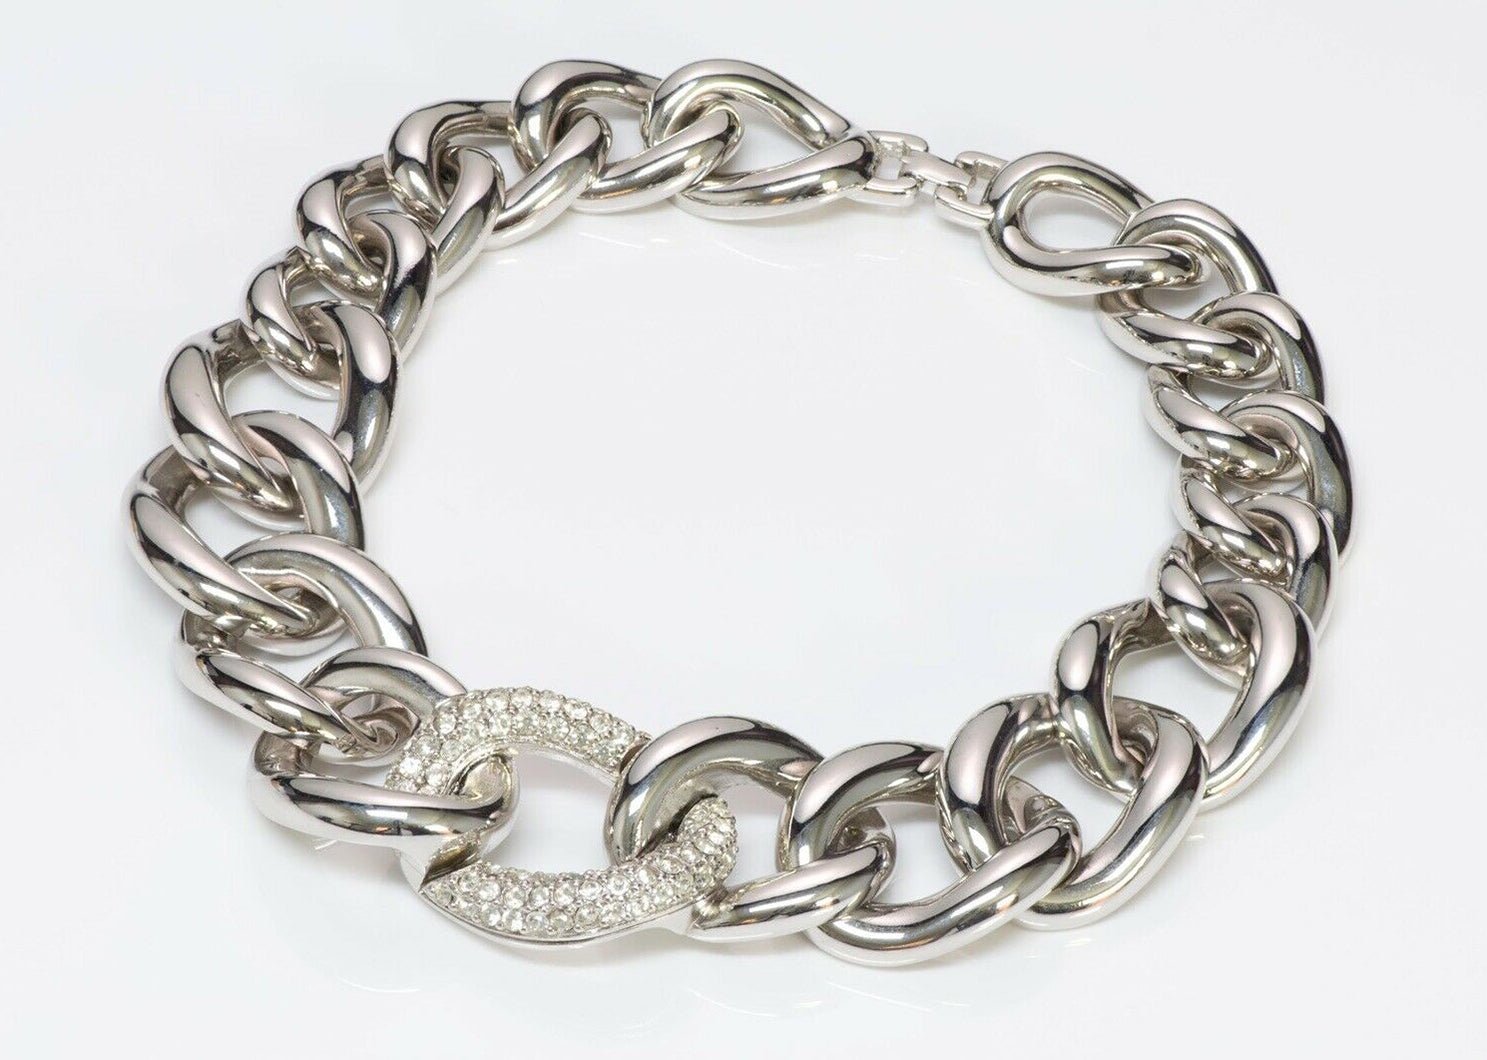 GIVENCHY Paris Chunky Chain Link Crystal Collar Necklace